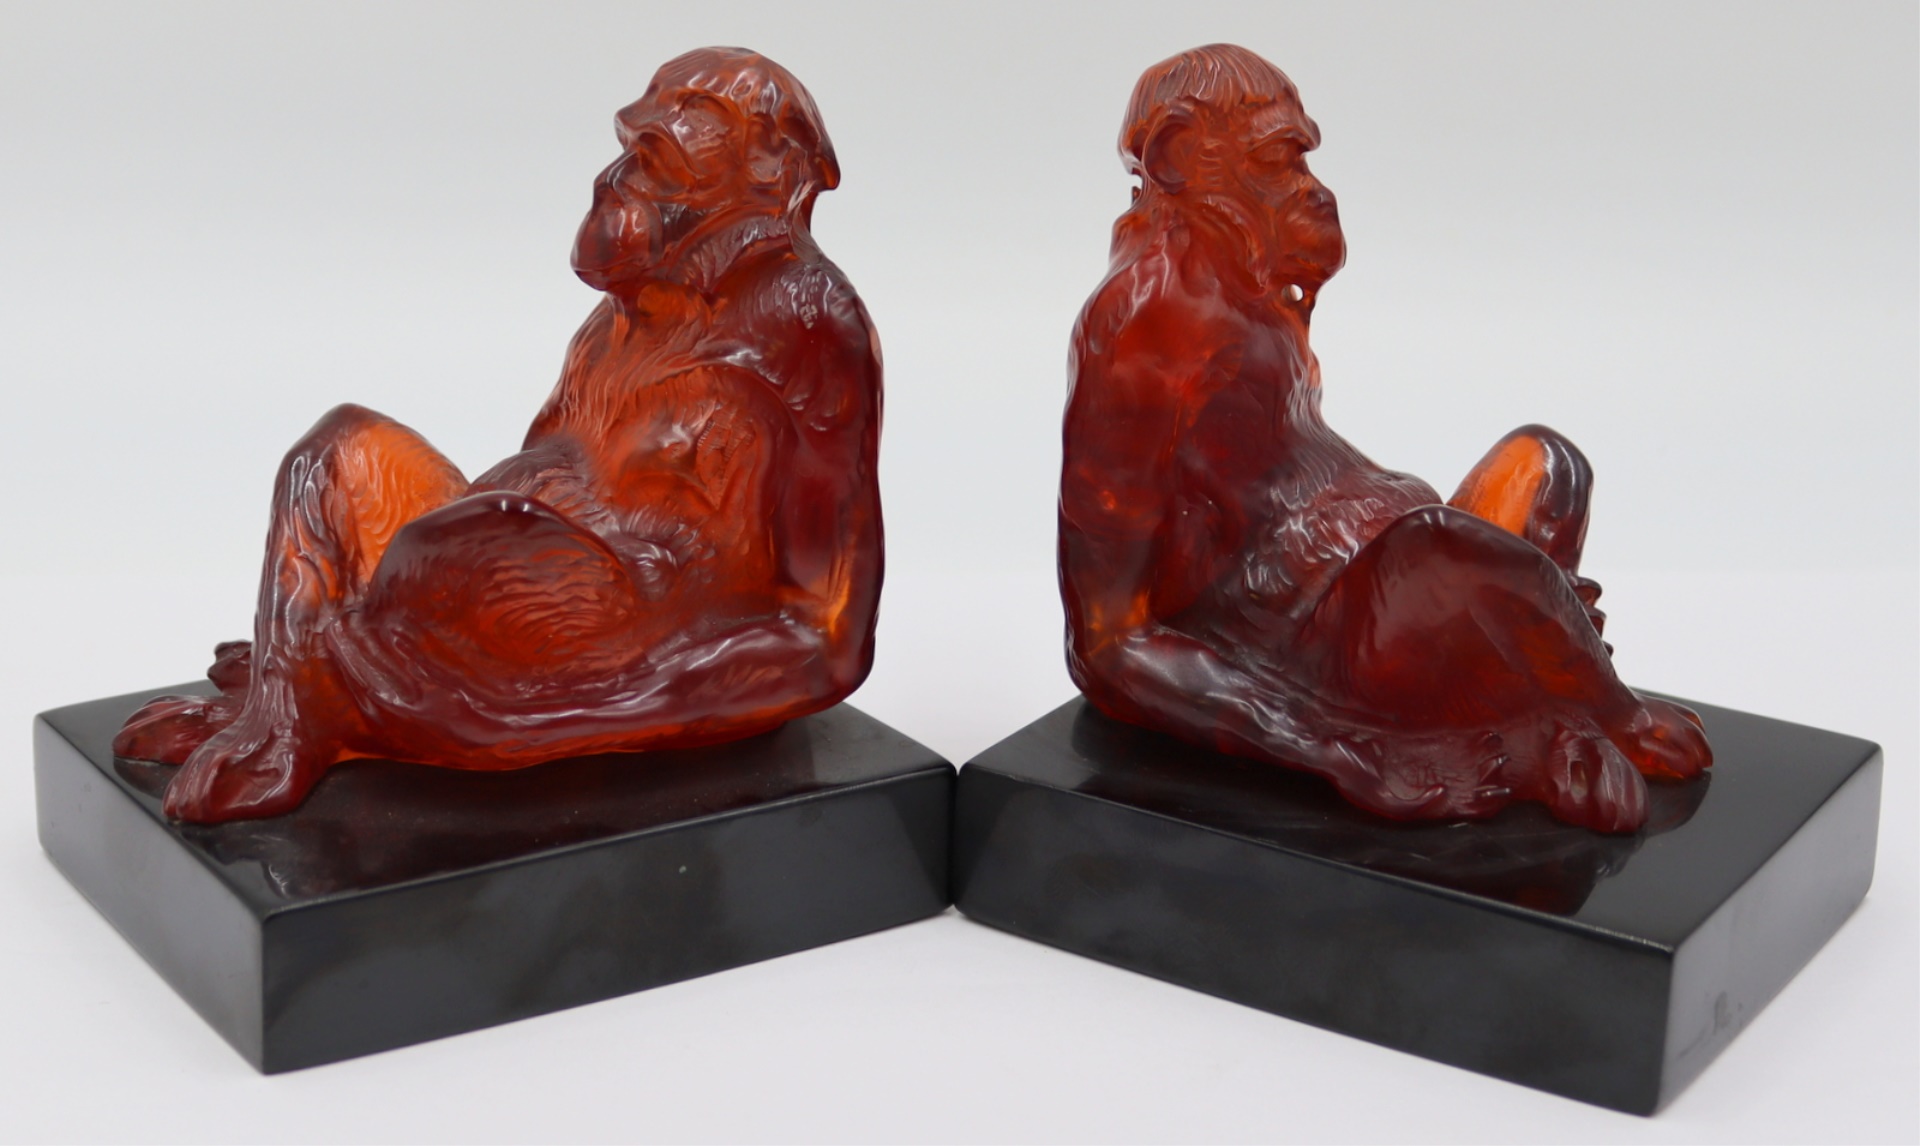 PAIR OF CARVED POSSIBLY AMBER MONKEY